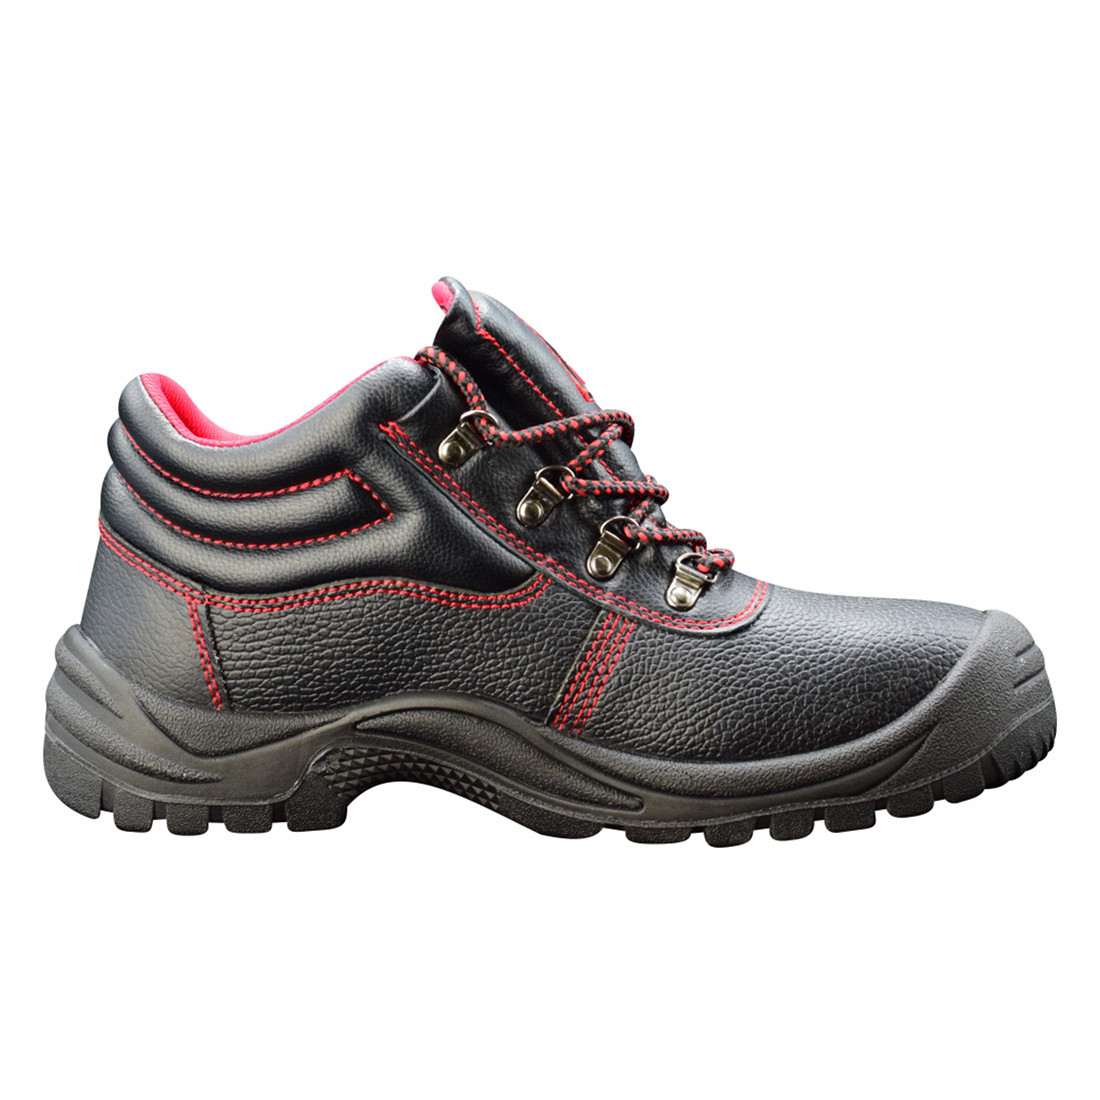 TD S1 Safety Boot - Footwear